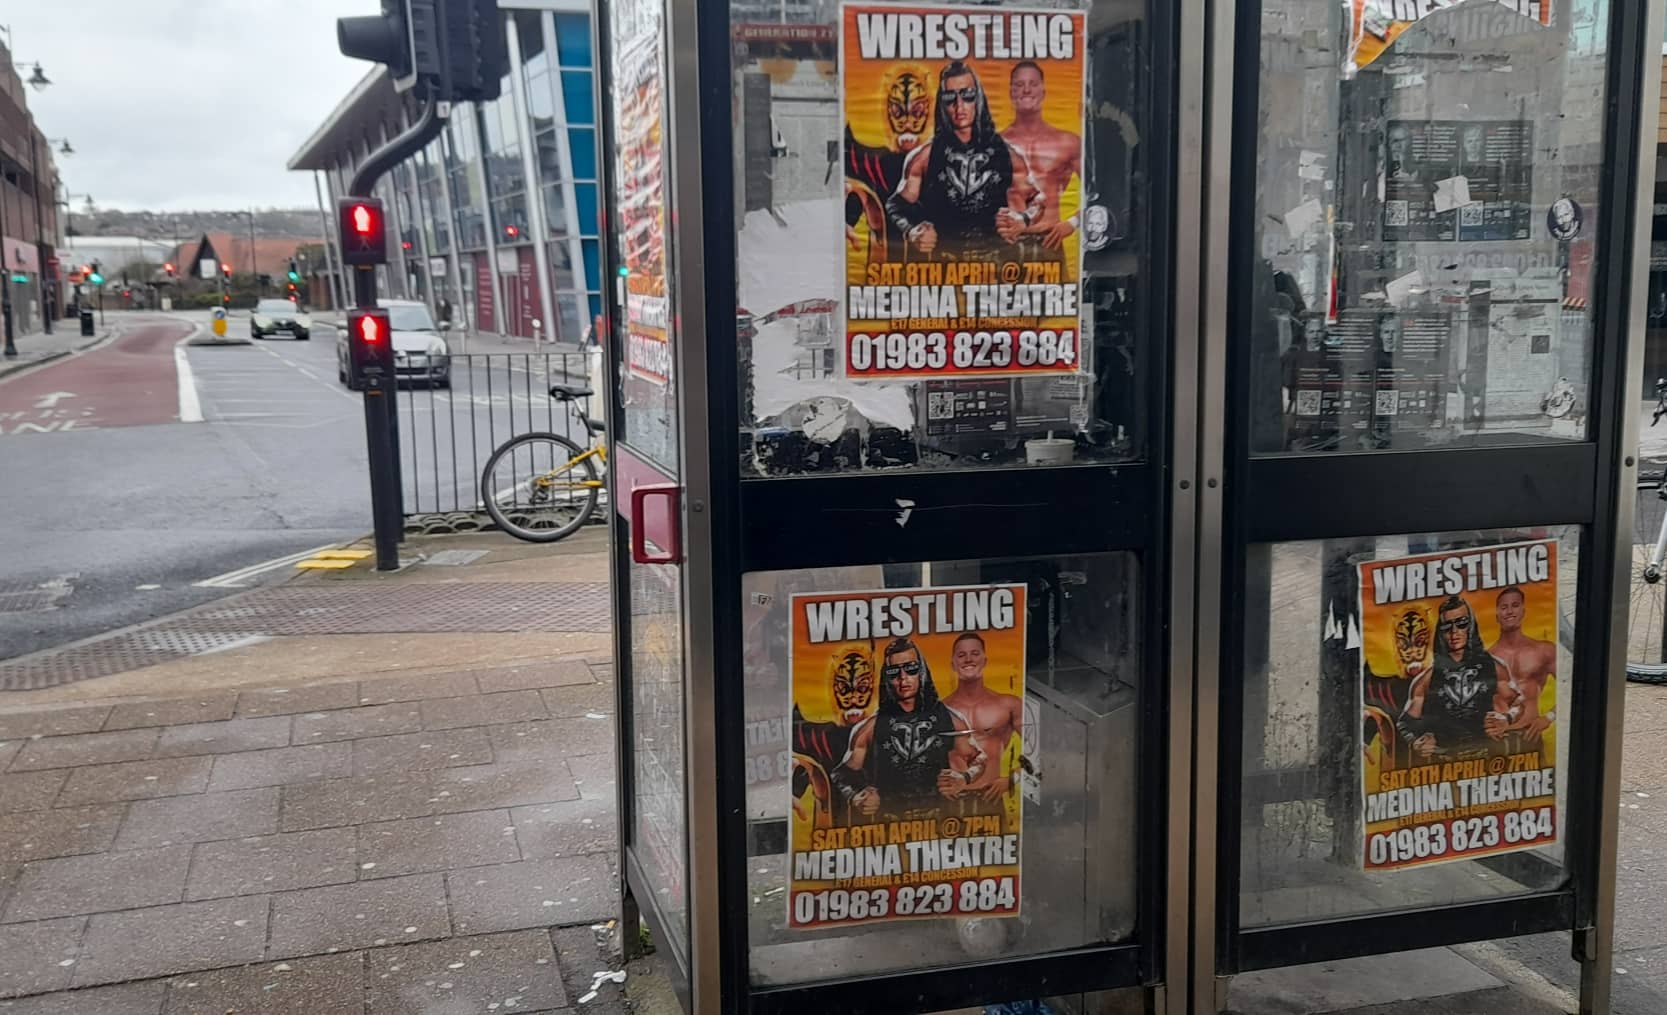 Wrestling posters on the phone boxes by Broc Silva